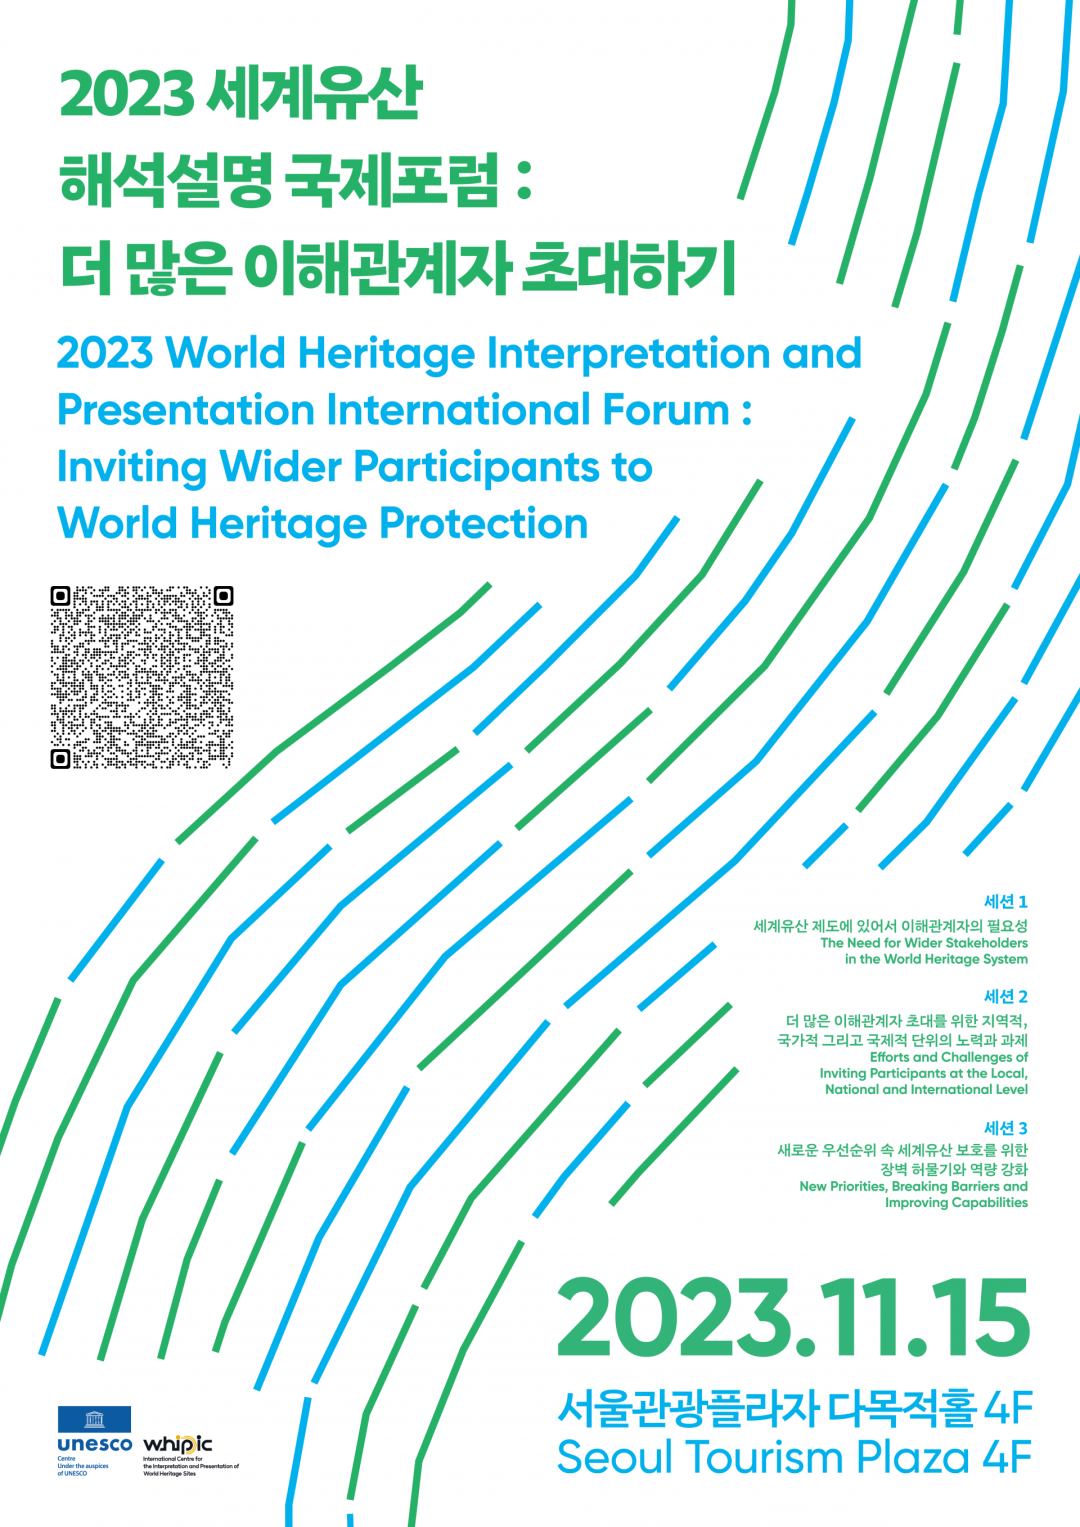 The WHIPIC World Heritage Interpretation and Exhibition Forum will be held in South Korea next week